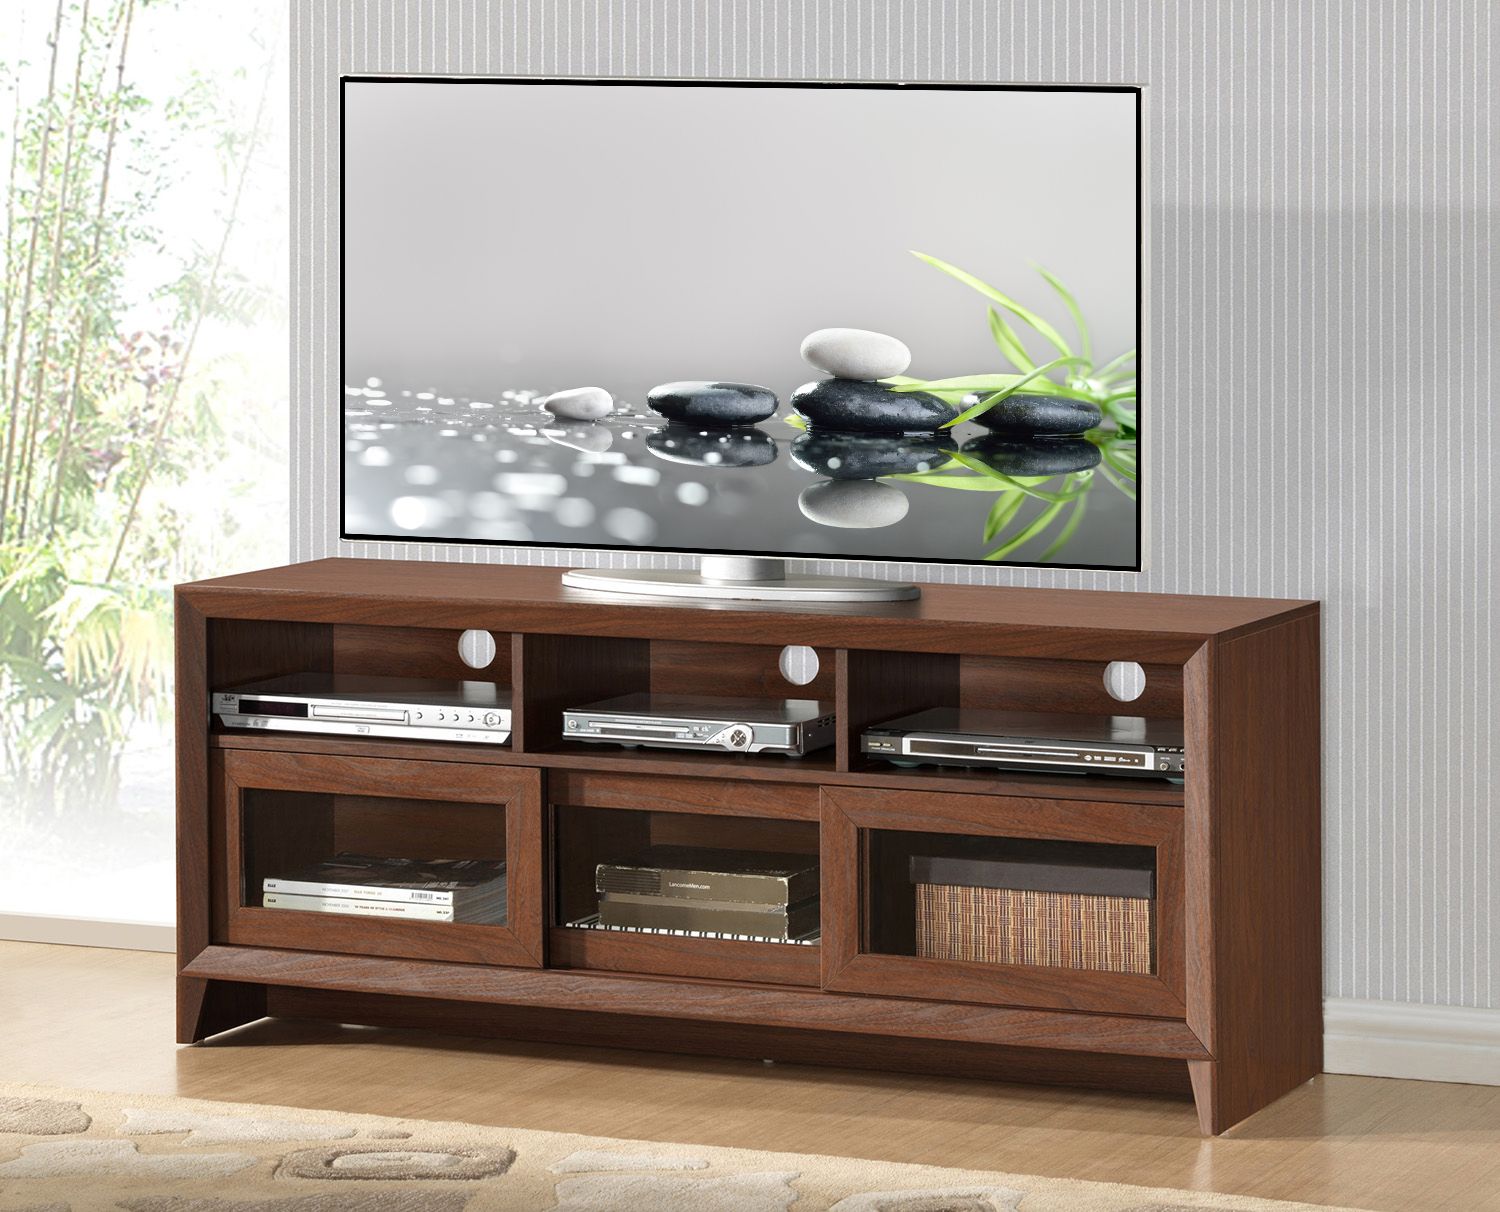 Techni Mobili 55" Modern Tv Stand For Tvs Up To 65" With Within Adora Tv Stands For Tvs Up To 65" (View 1 of 15)